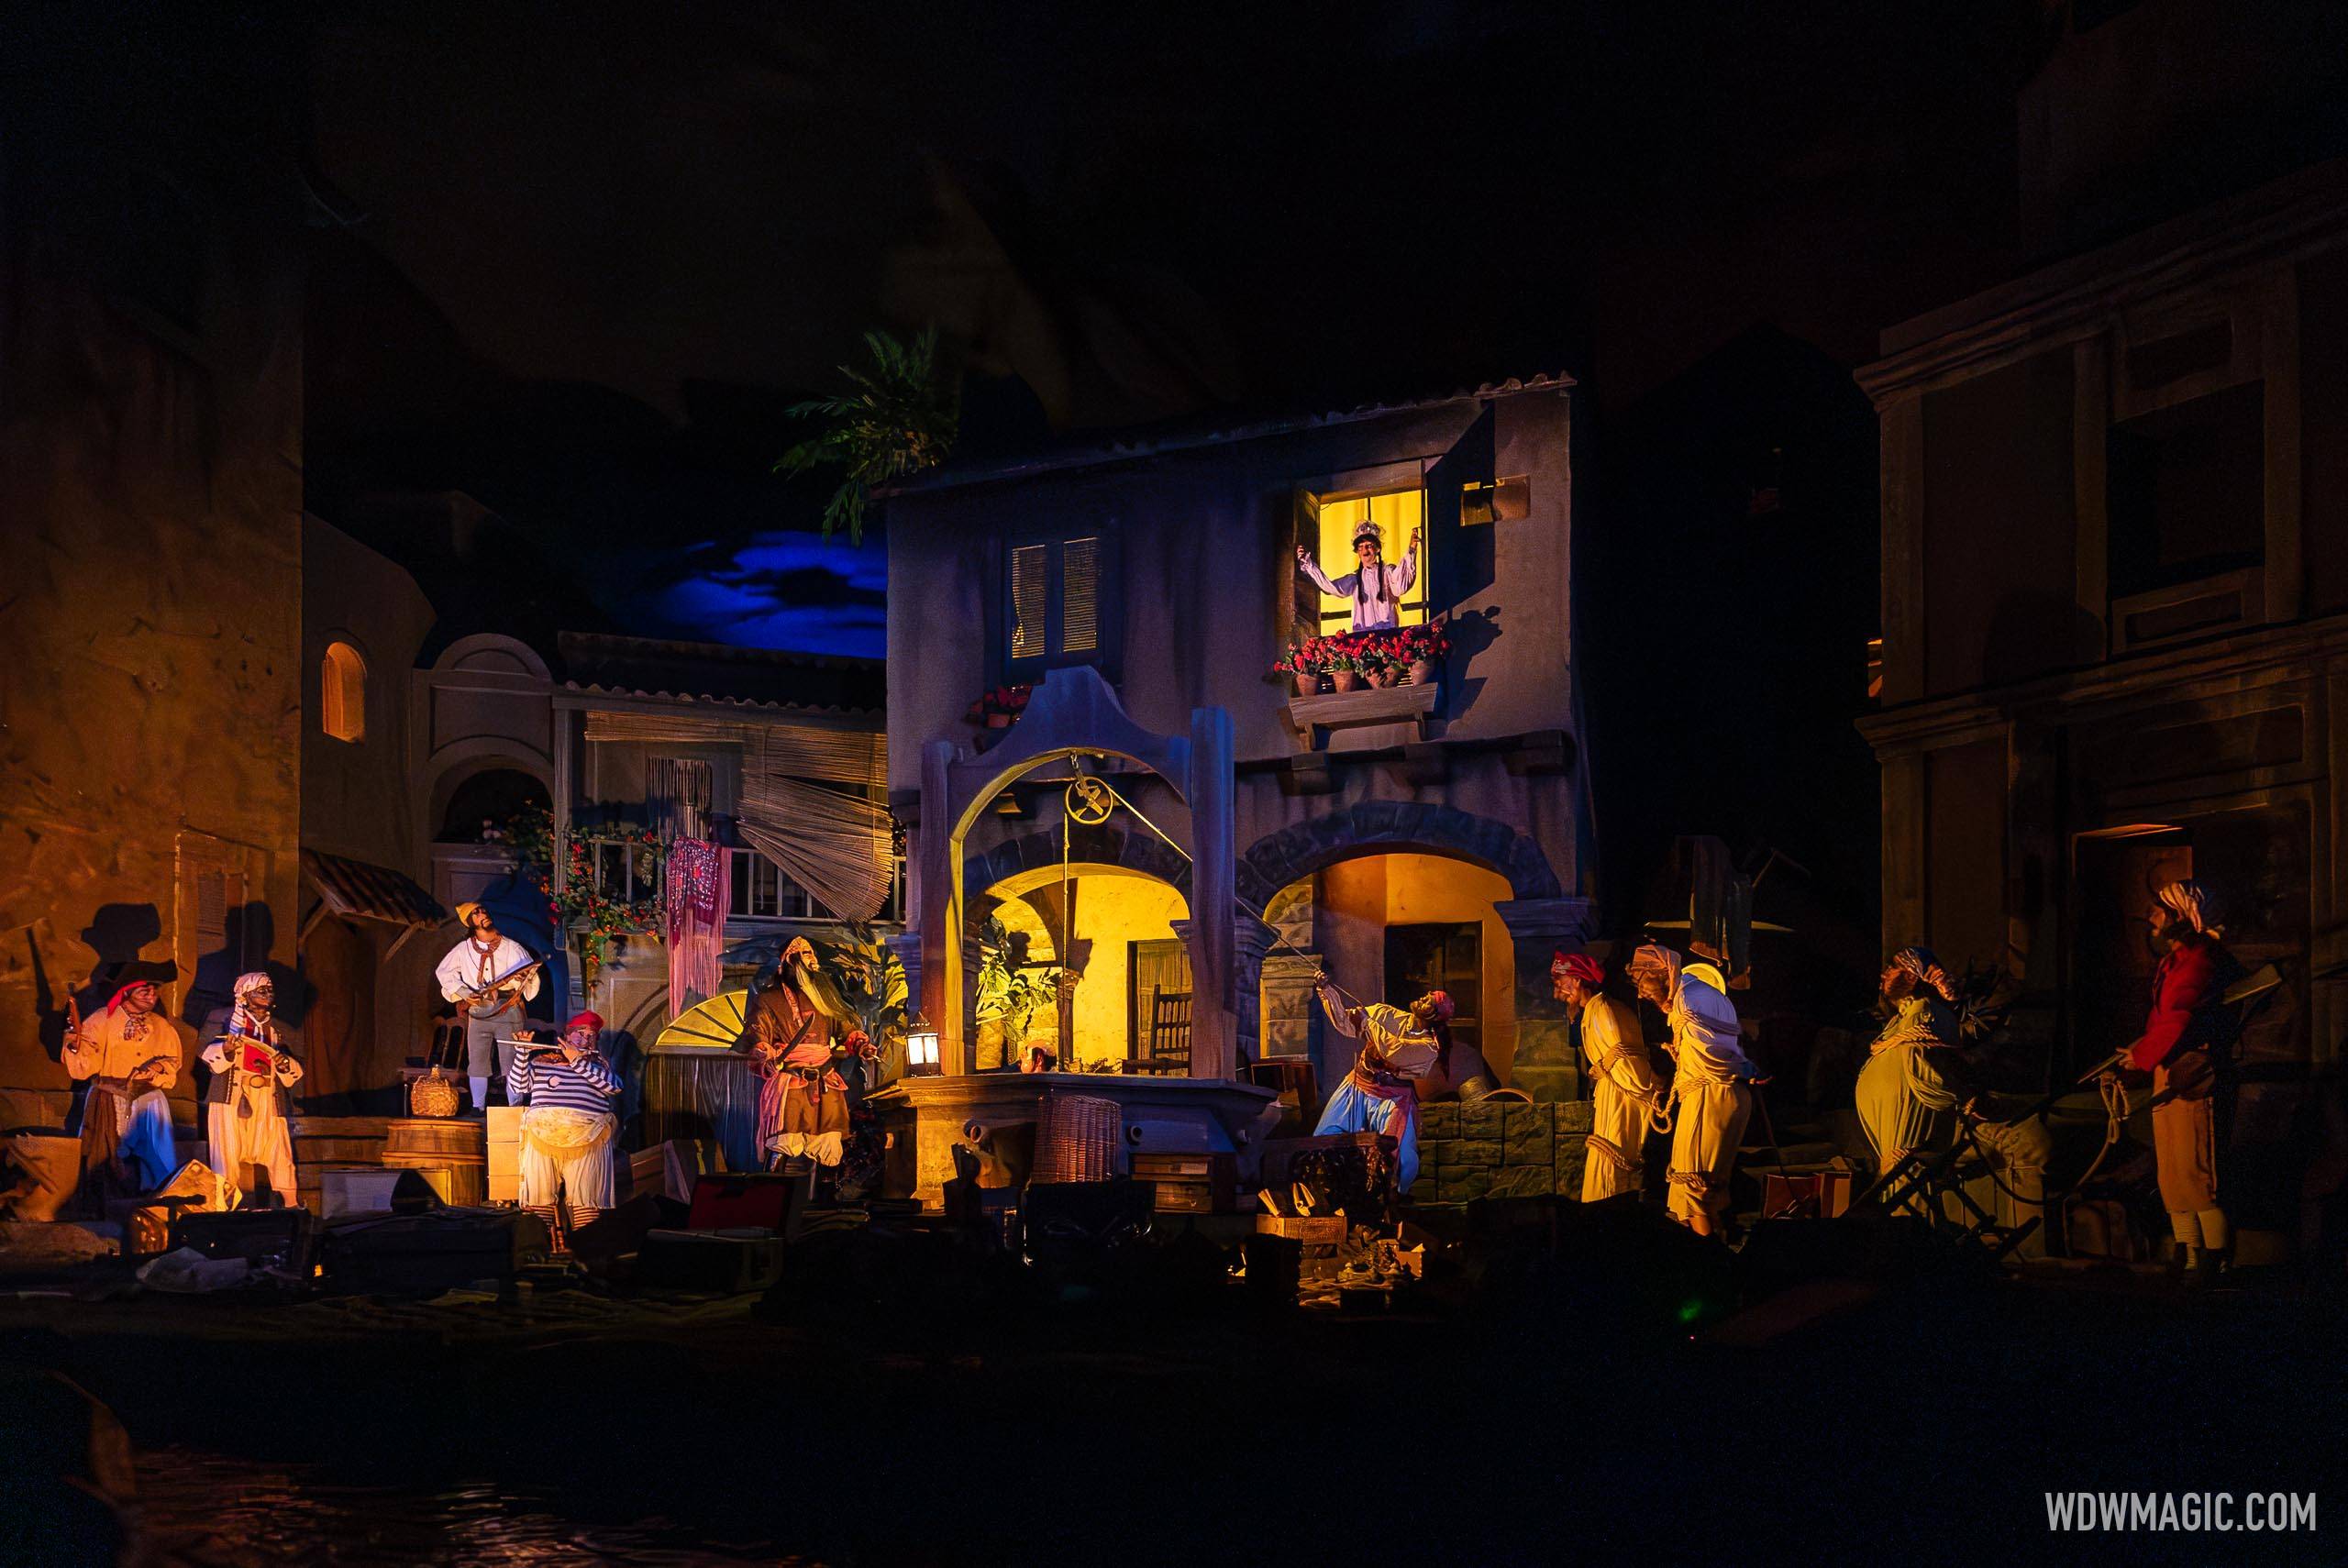 Pirates of the Caribbean closing for major refurbishment from May